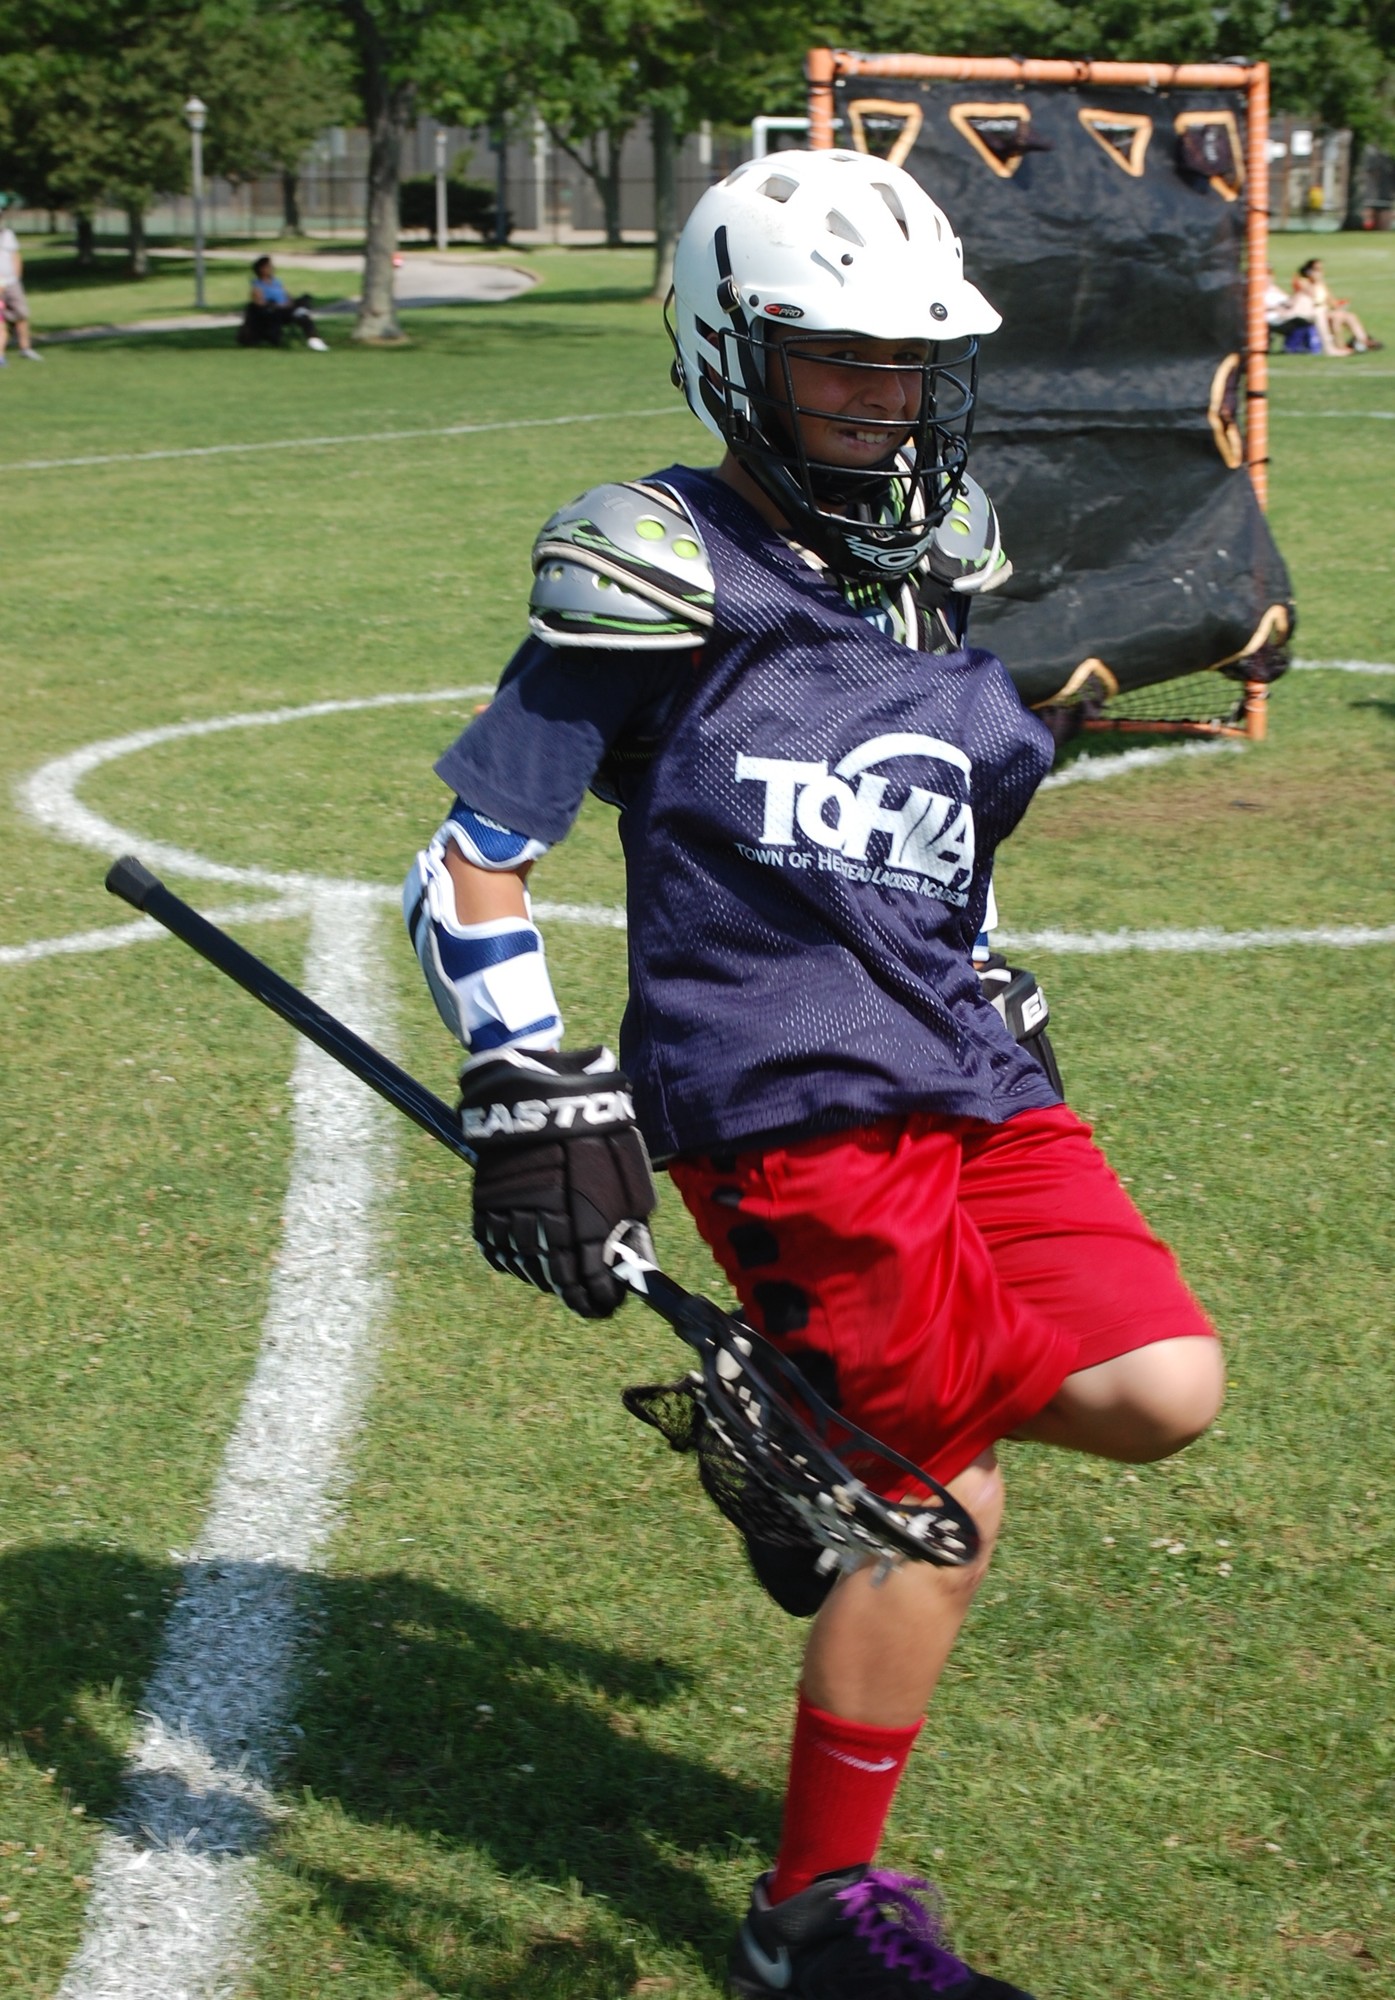 Chris Wallace, of Seaford, was there to improve his lacrosse skills.